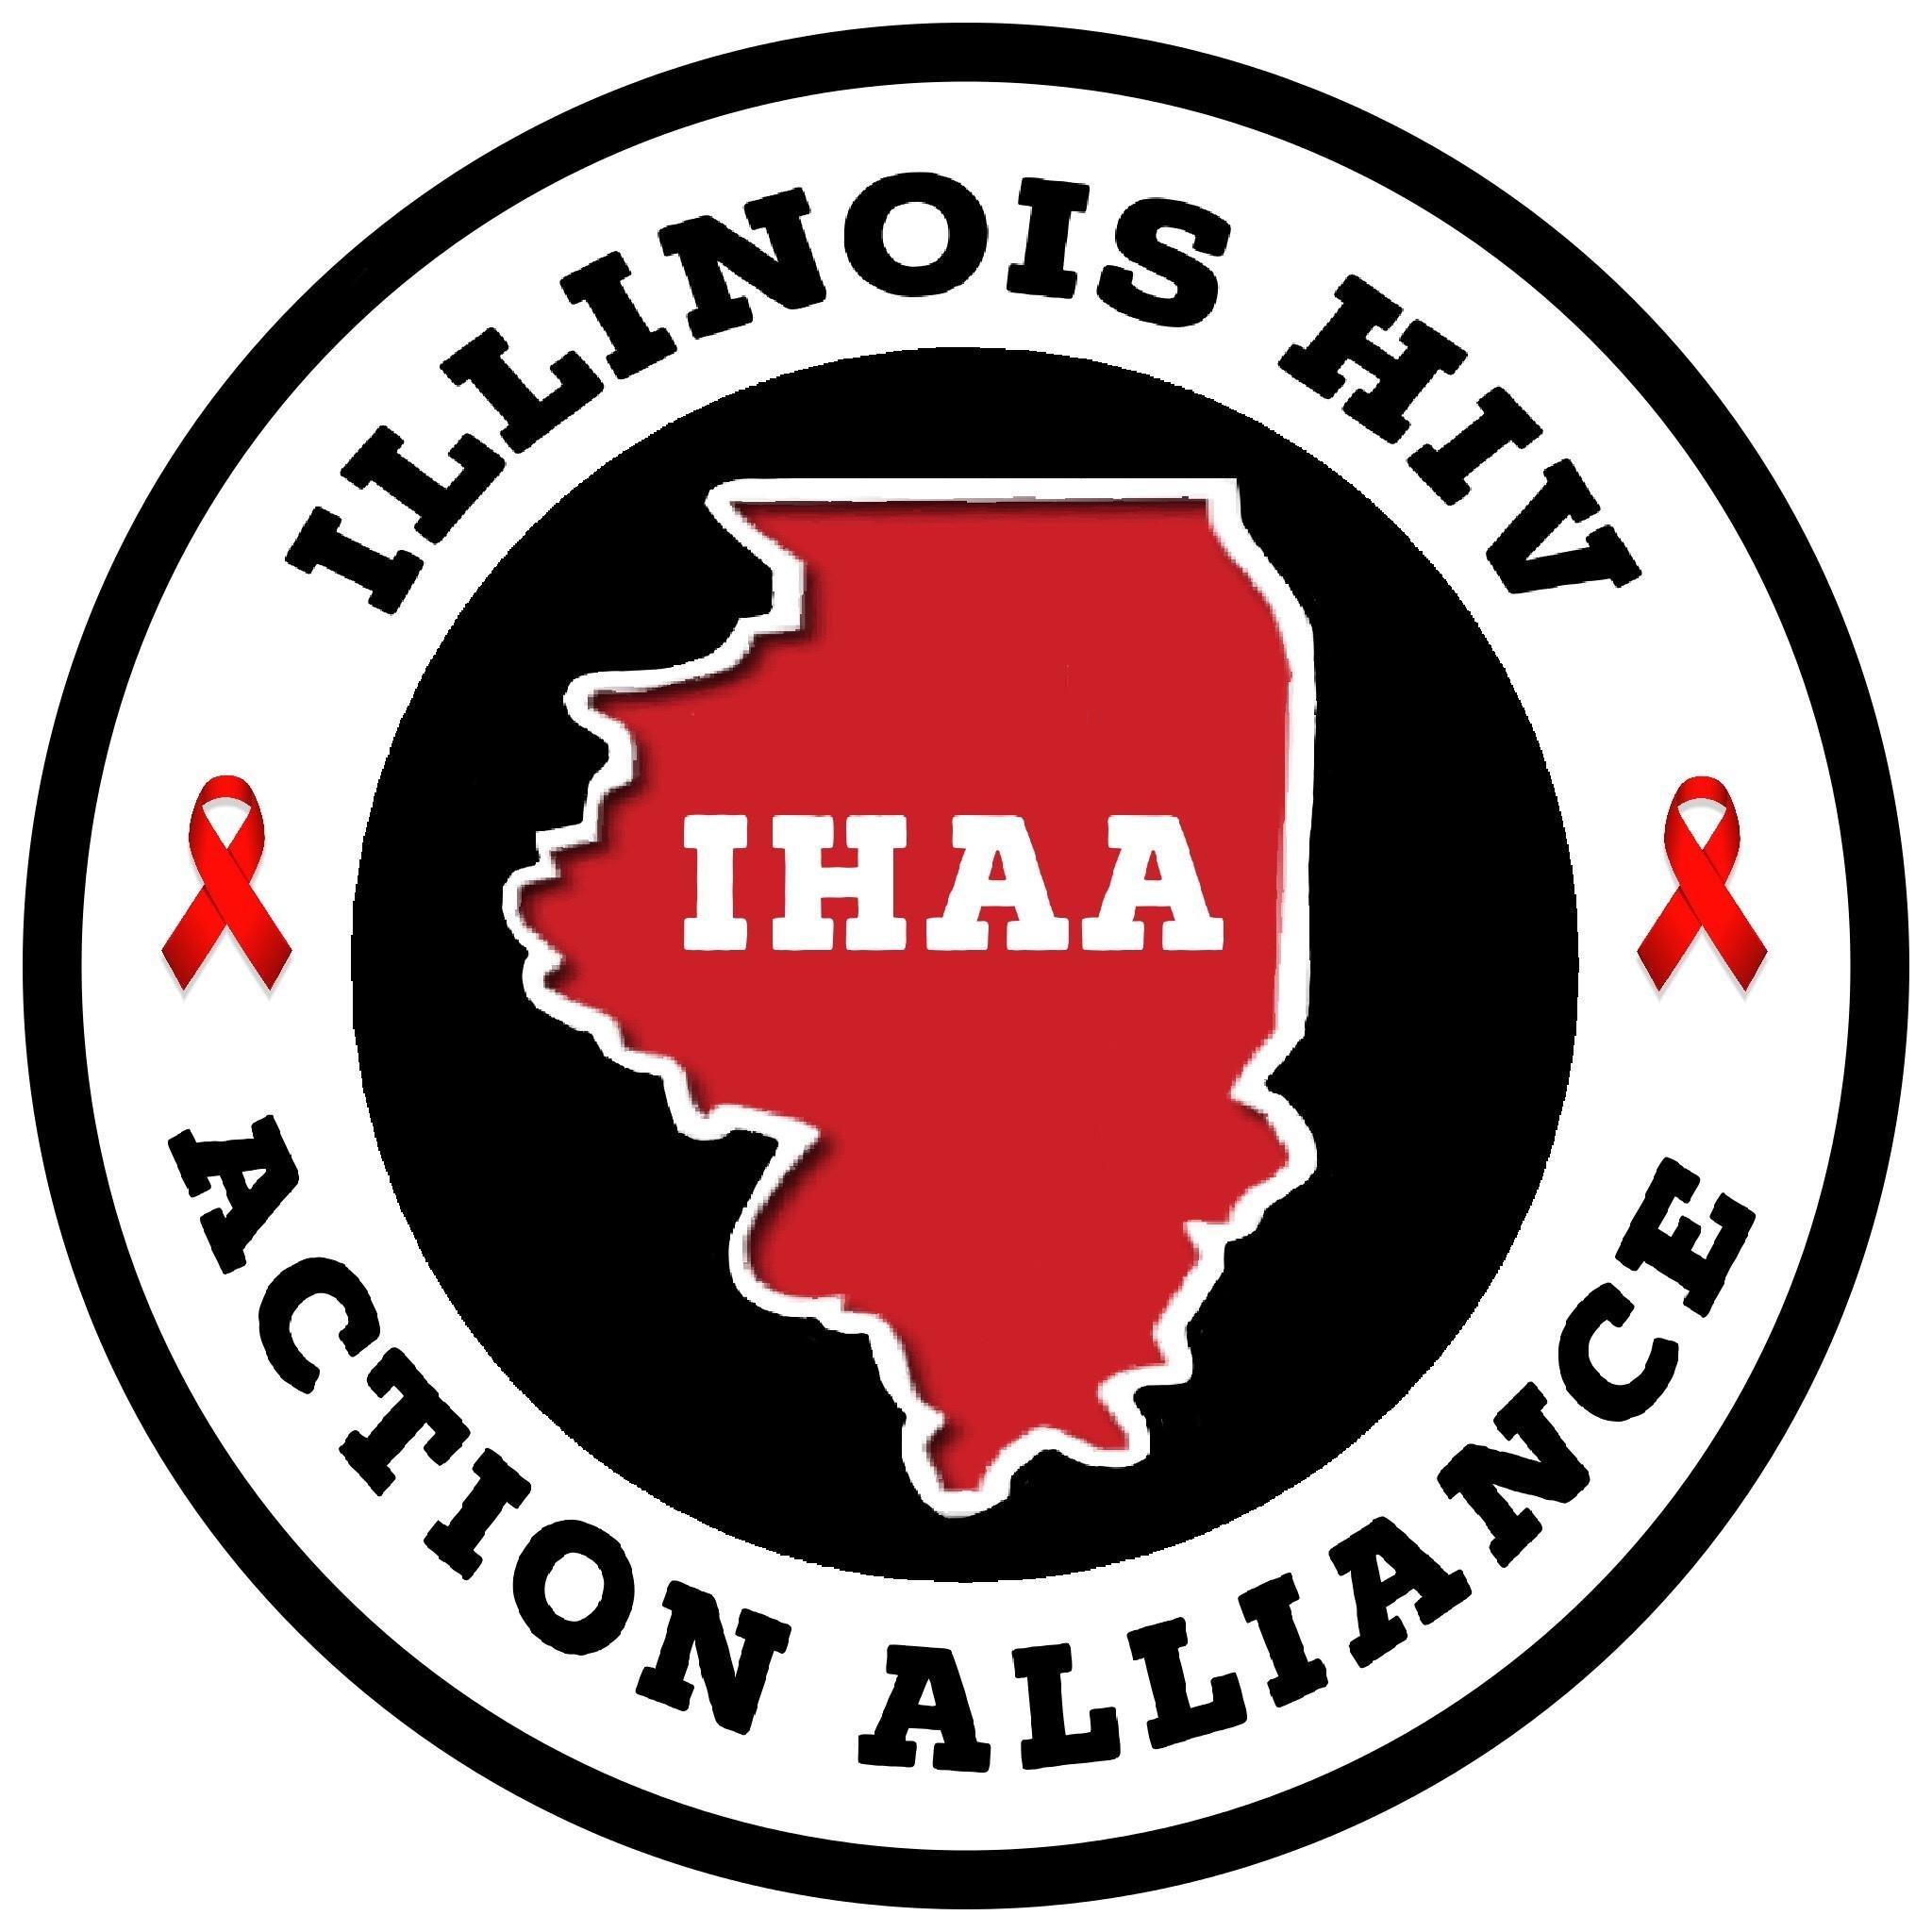 A statewide coalition of legal, health and policy organizations, and other advocates engaged in an organized effort to end HIV criminalization in Illinois.